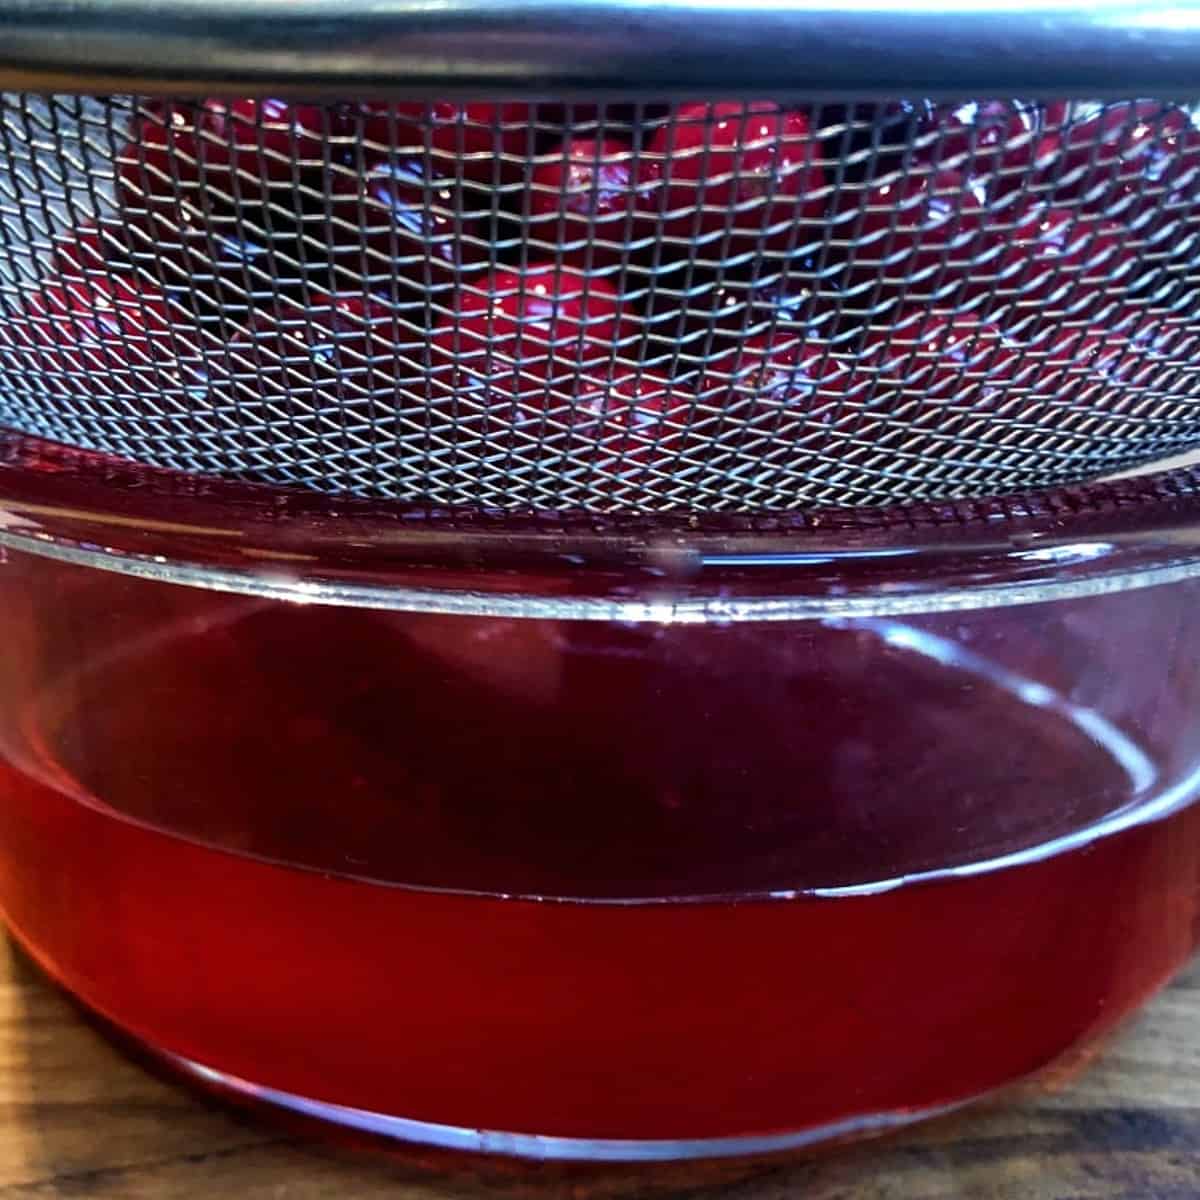 cranberries being strained from syrup.